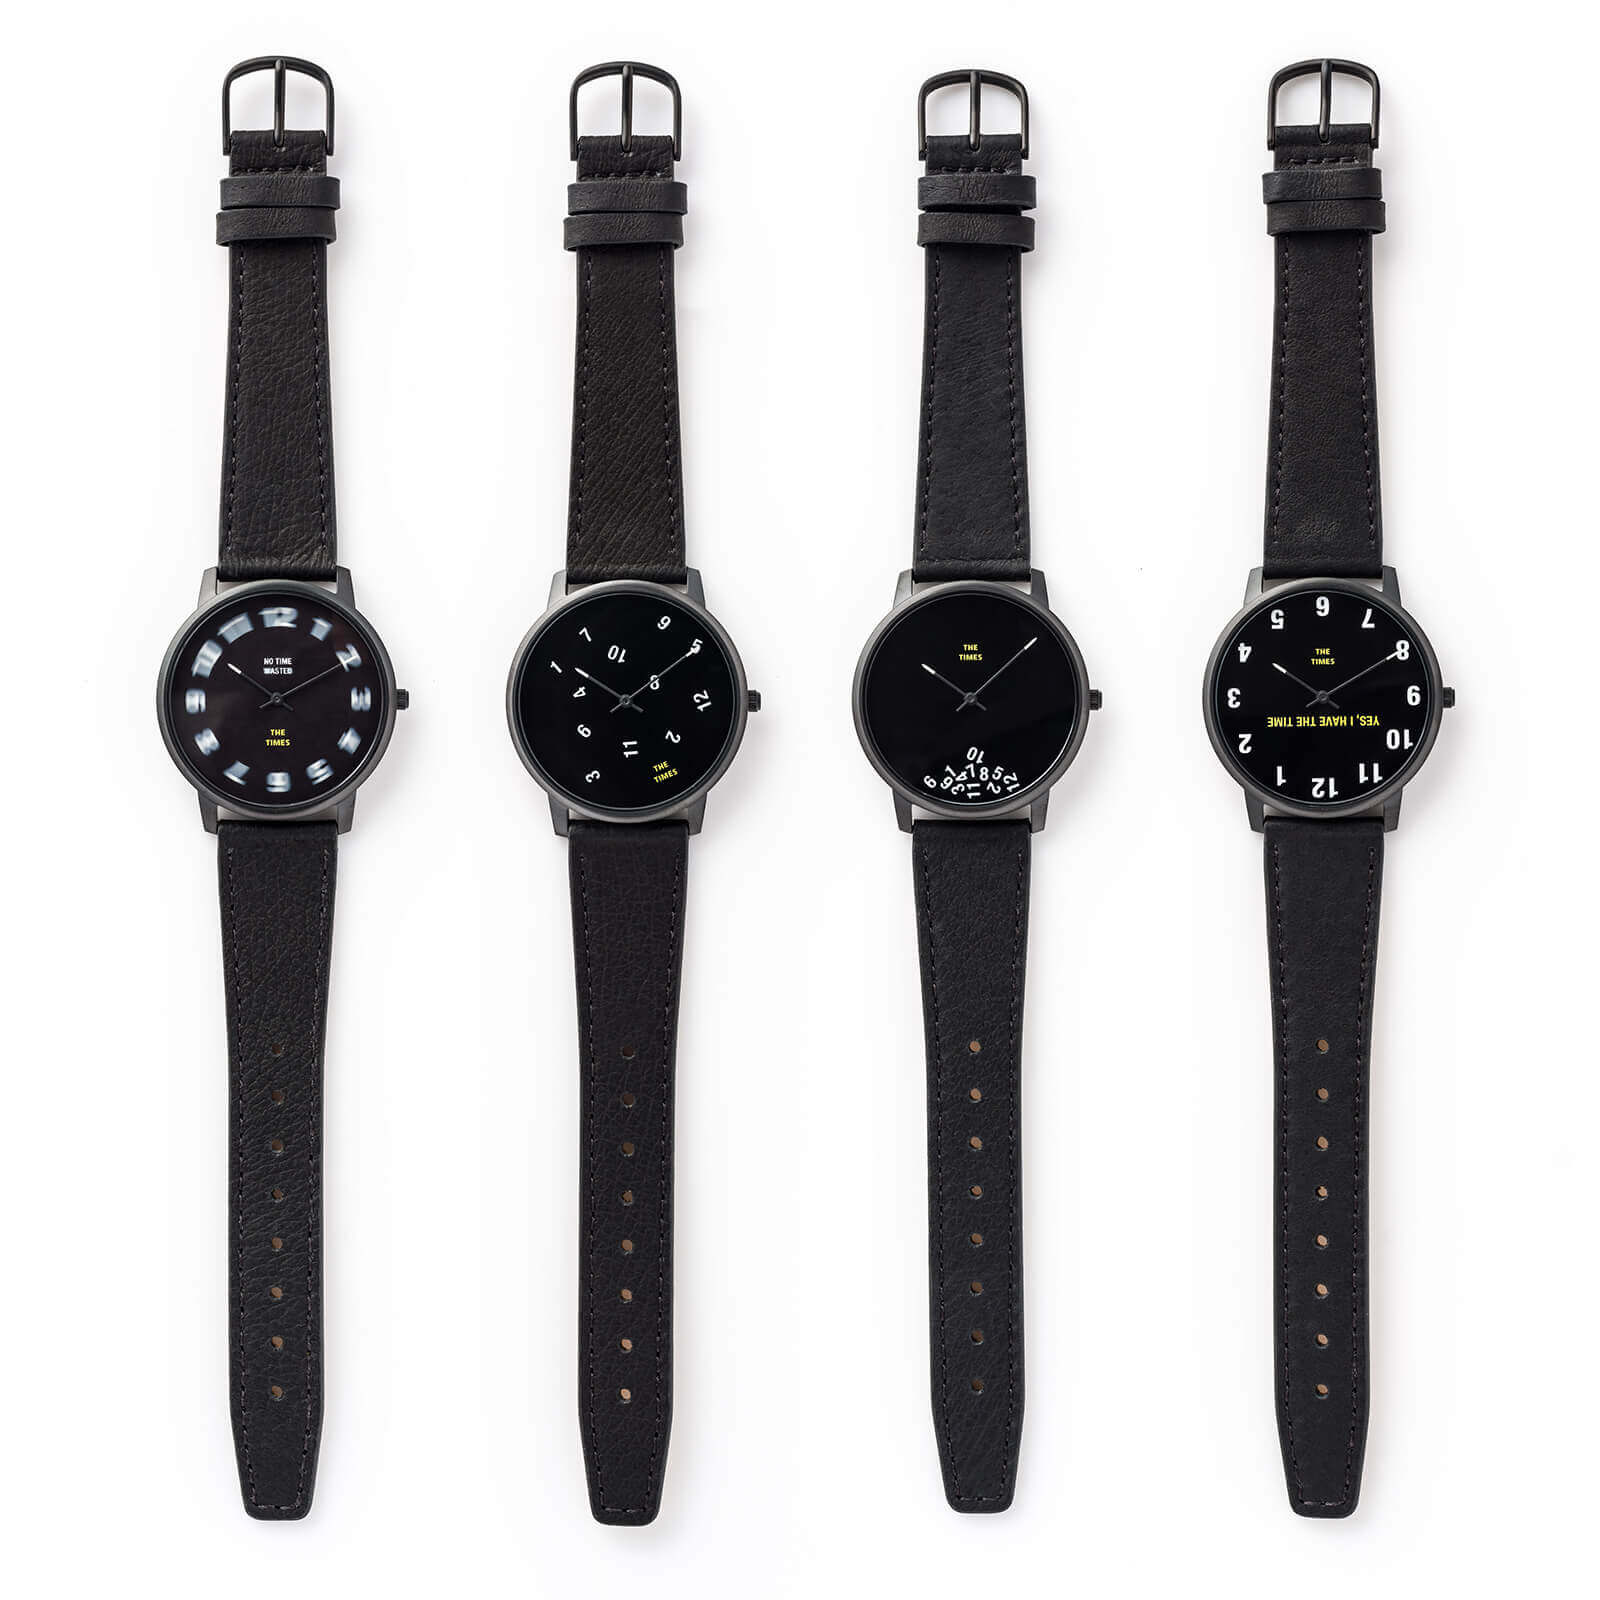 No Time Wasted - Projects Watches